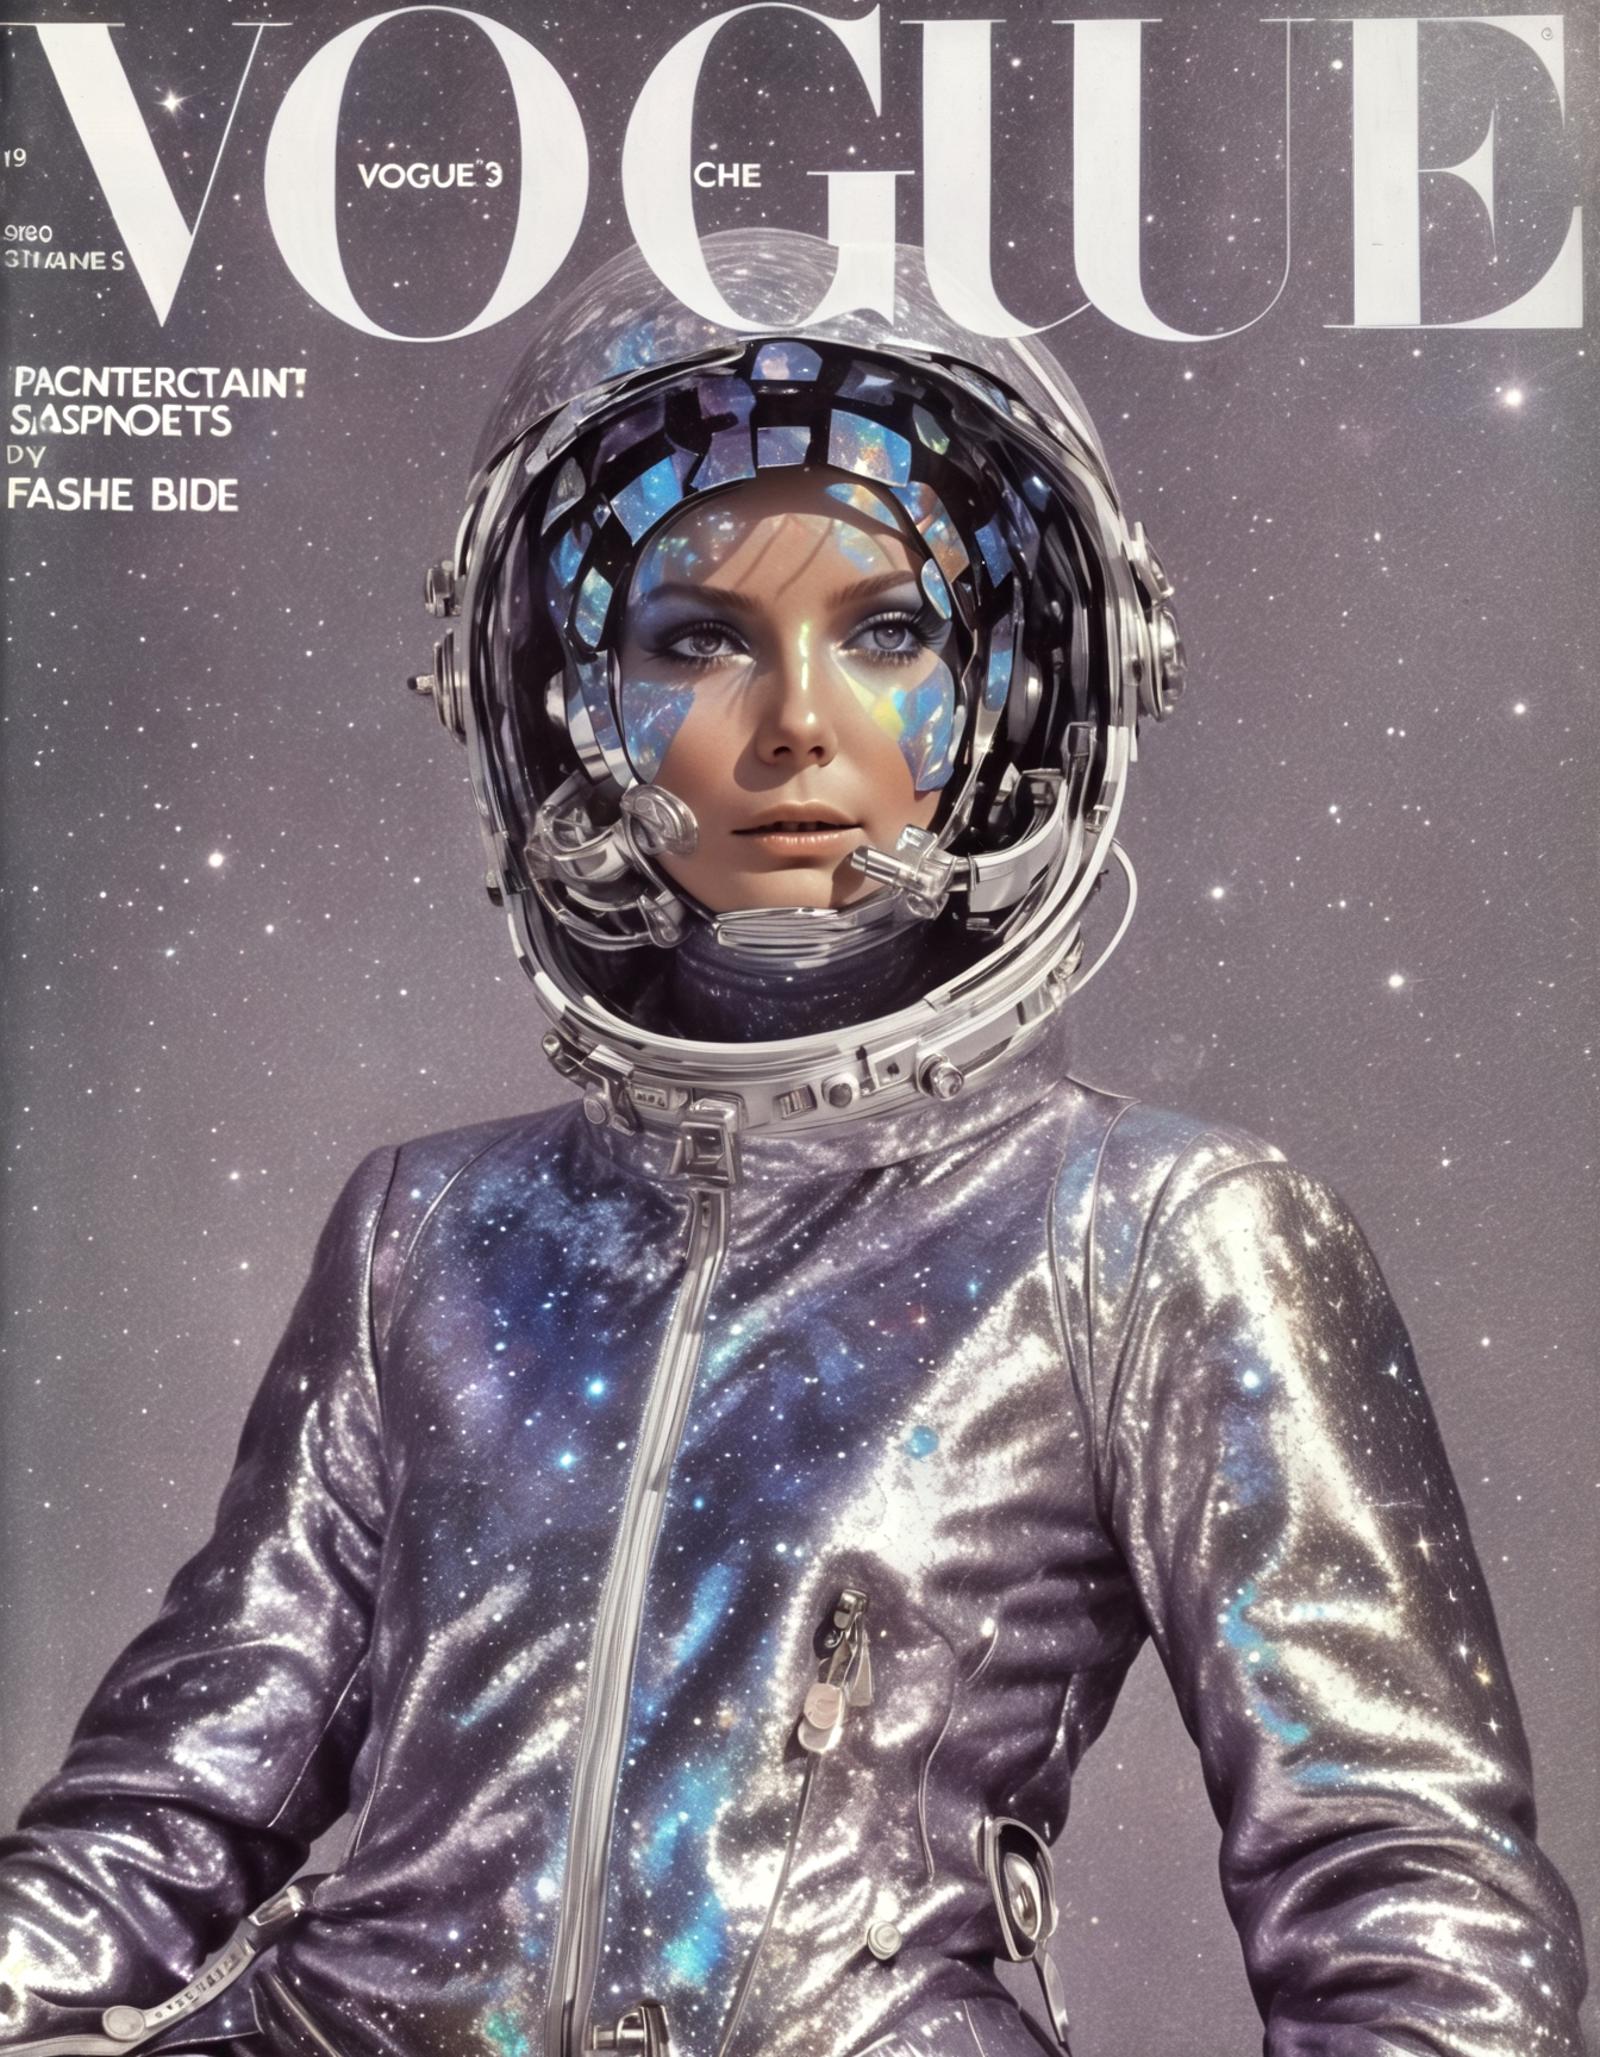 VOGUE (Fashion Magazine Cover Vintage 1960-1975) {Style} [SDXL] image by denrakeiw